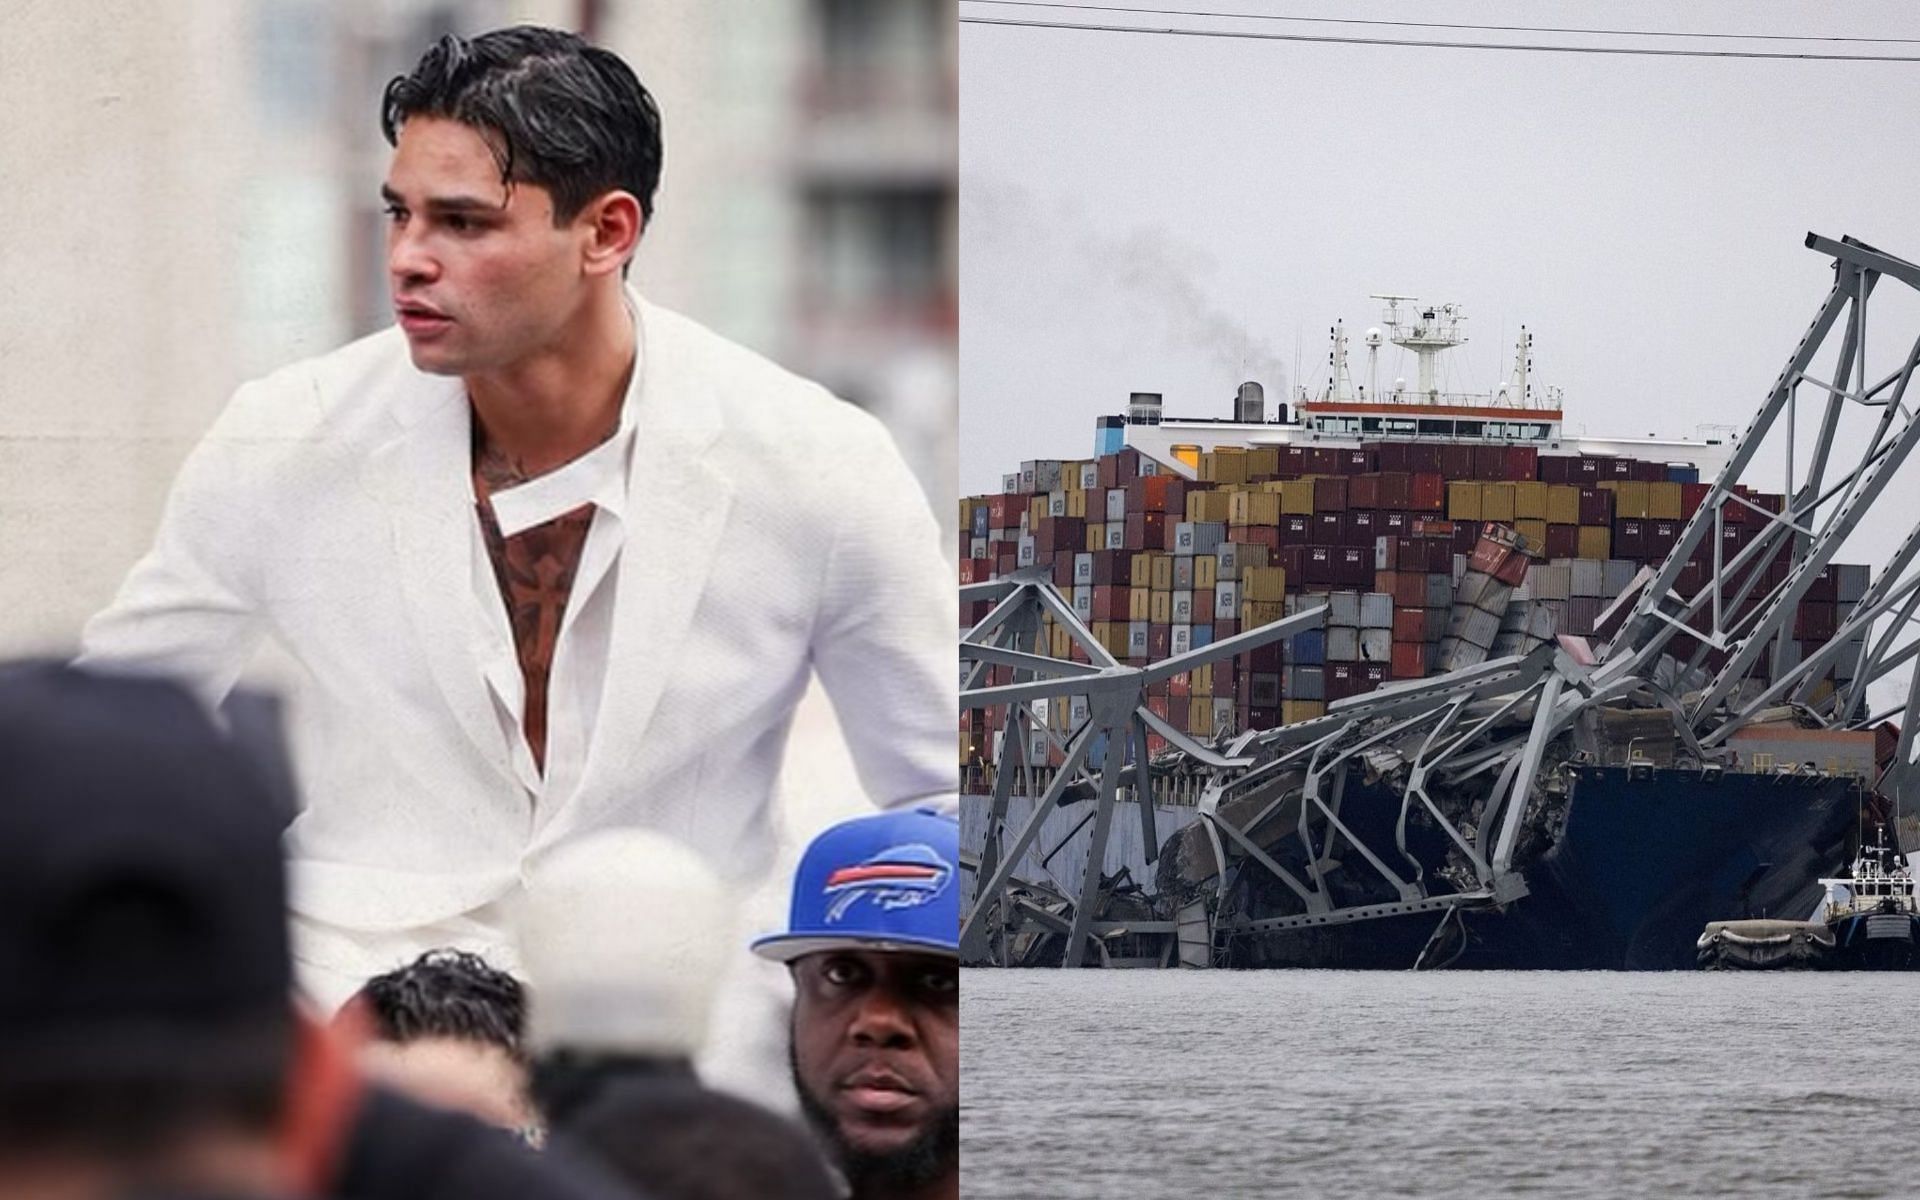 Ryan Garcia (L) has discussed the collapse of a Baltimore Bridge. [Images via @KingRyan on Instagram and Getty Images]